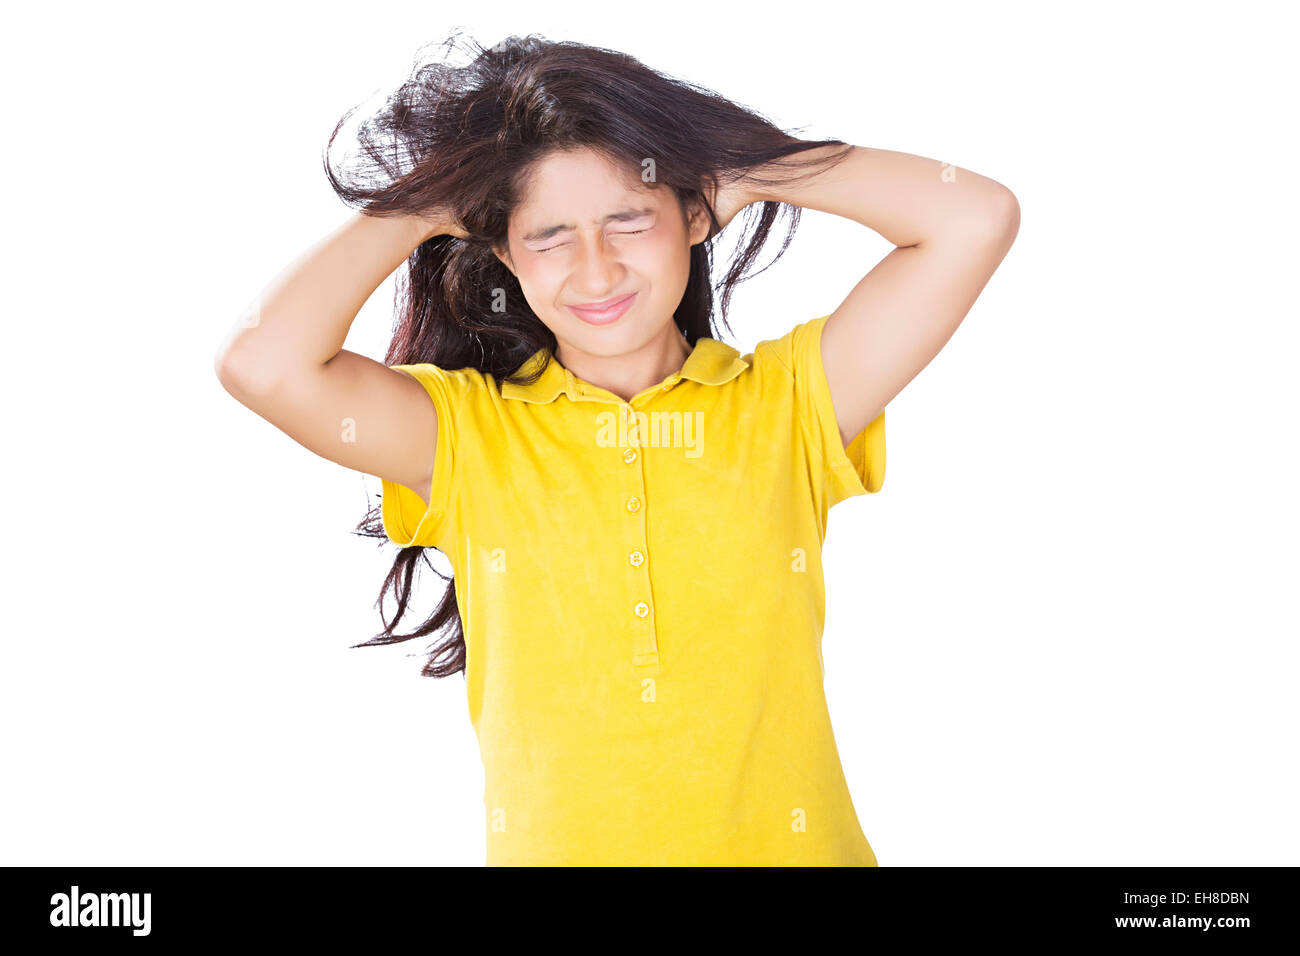 1 indian Young girl Teenager Stress Problem Stock Photo